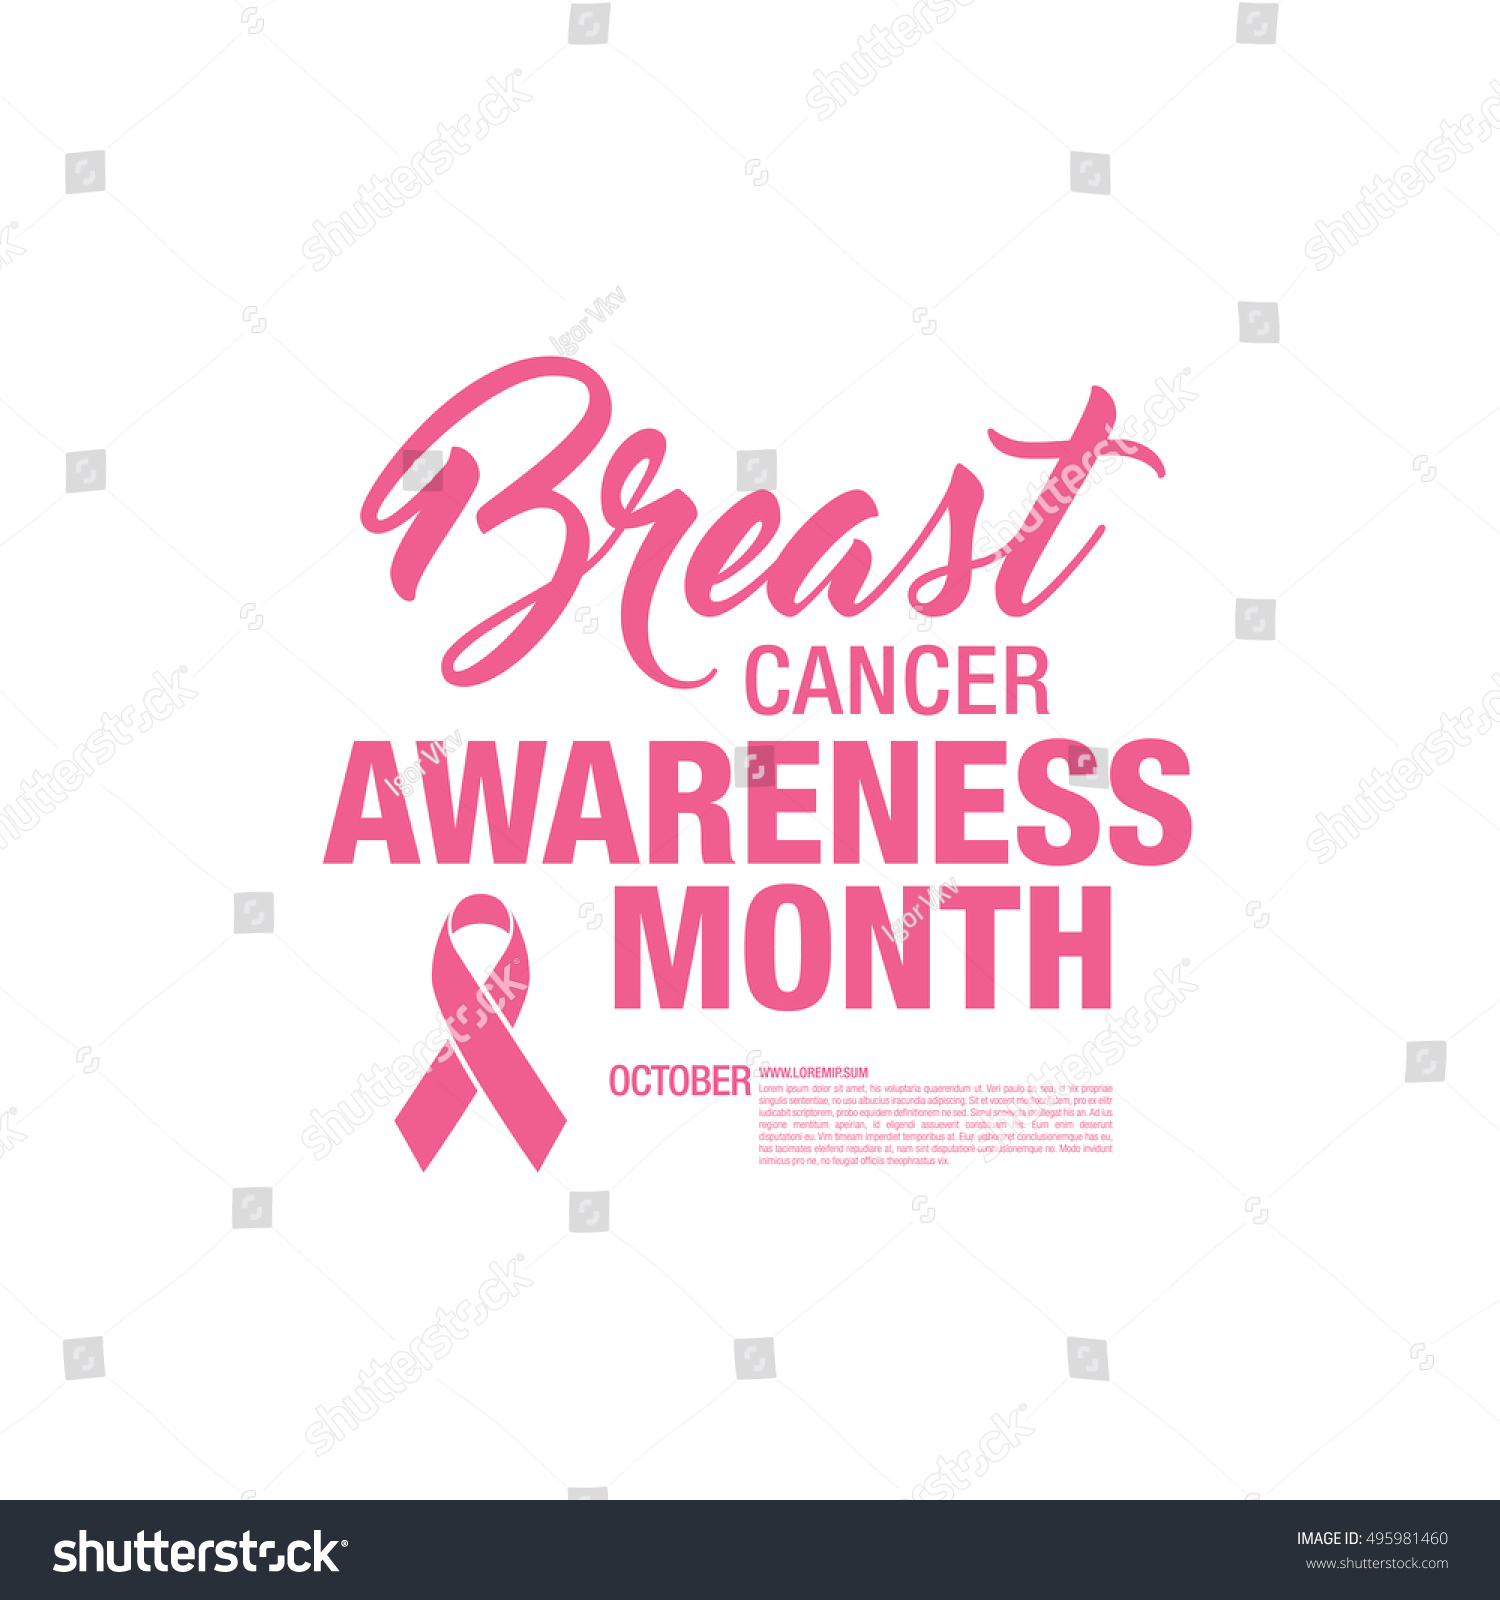 Breast cancer awareness ribbon isolated on white background. Vector illustration #495981460